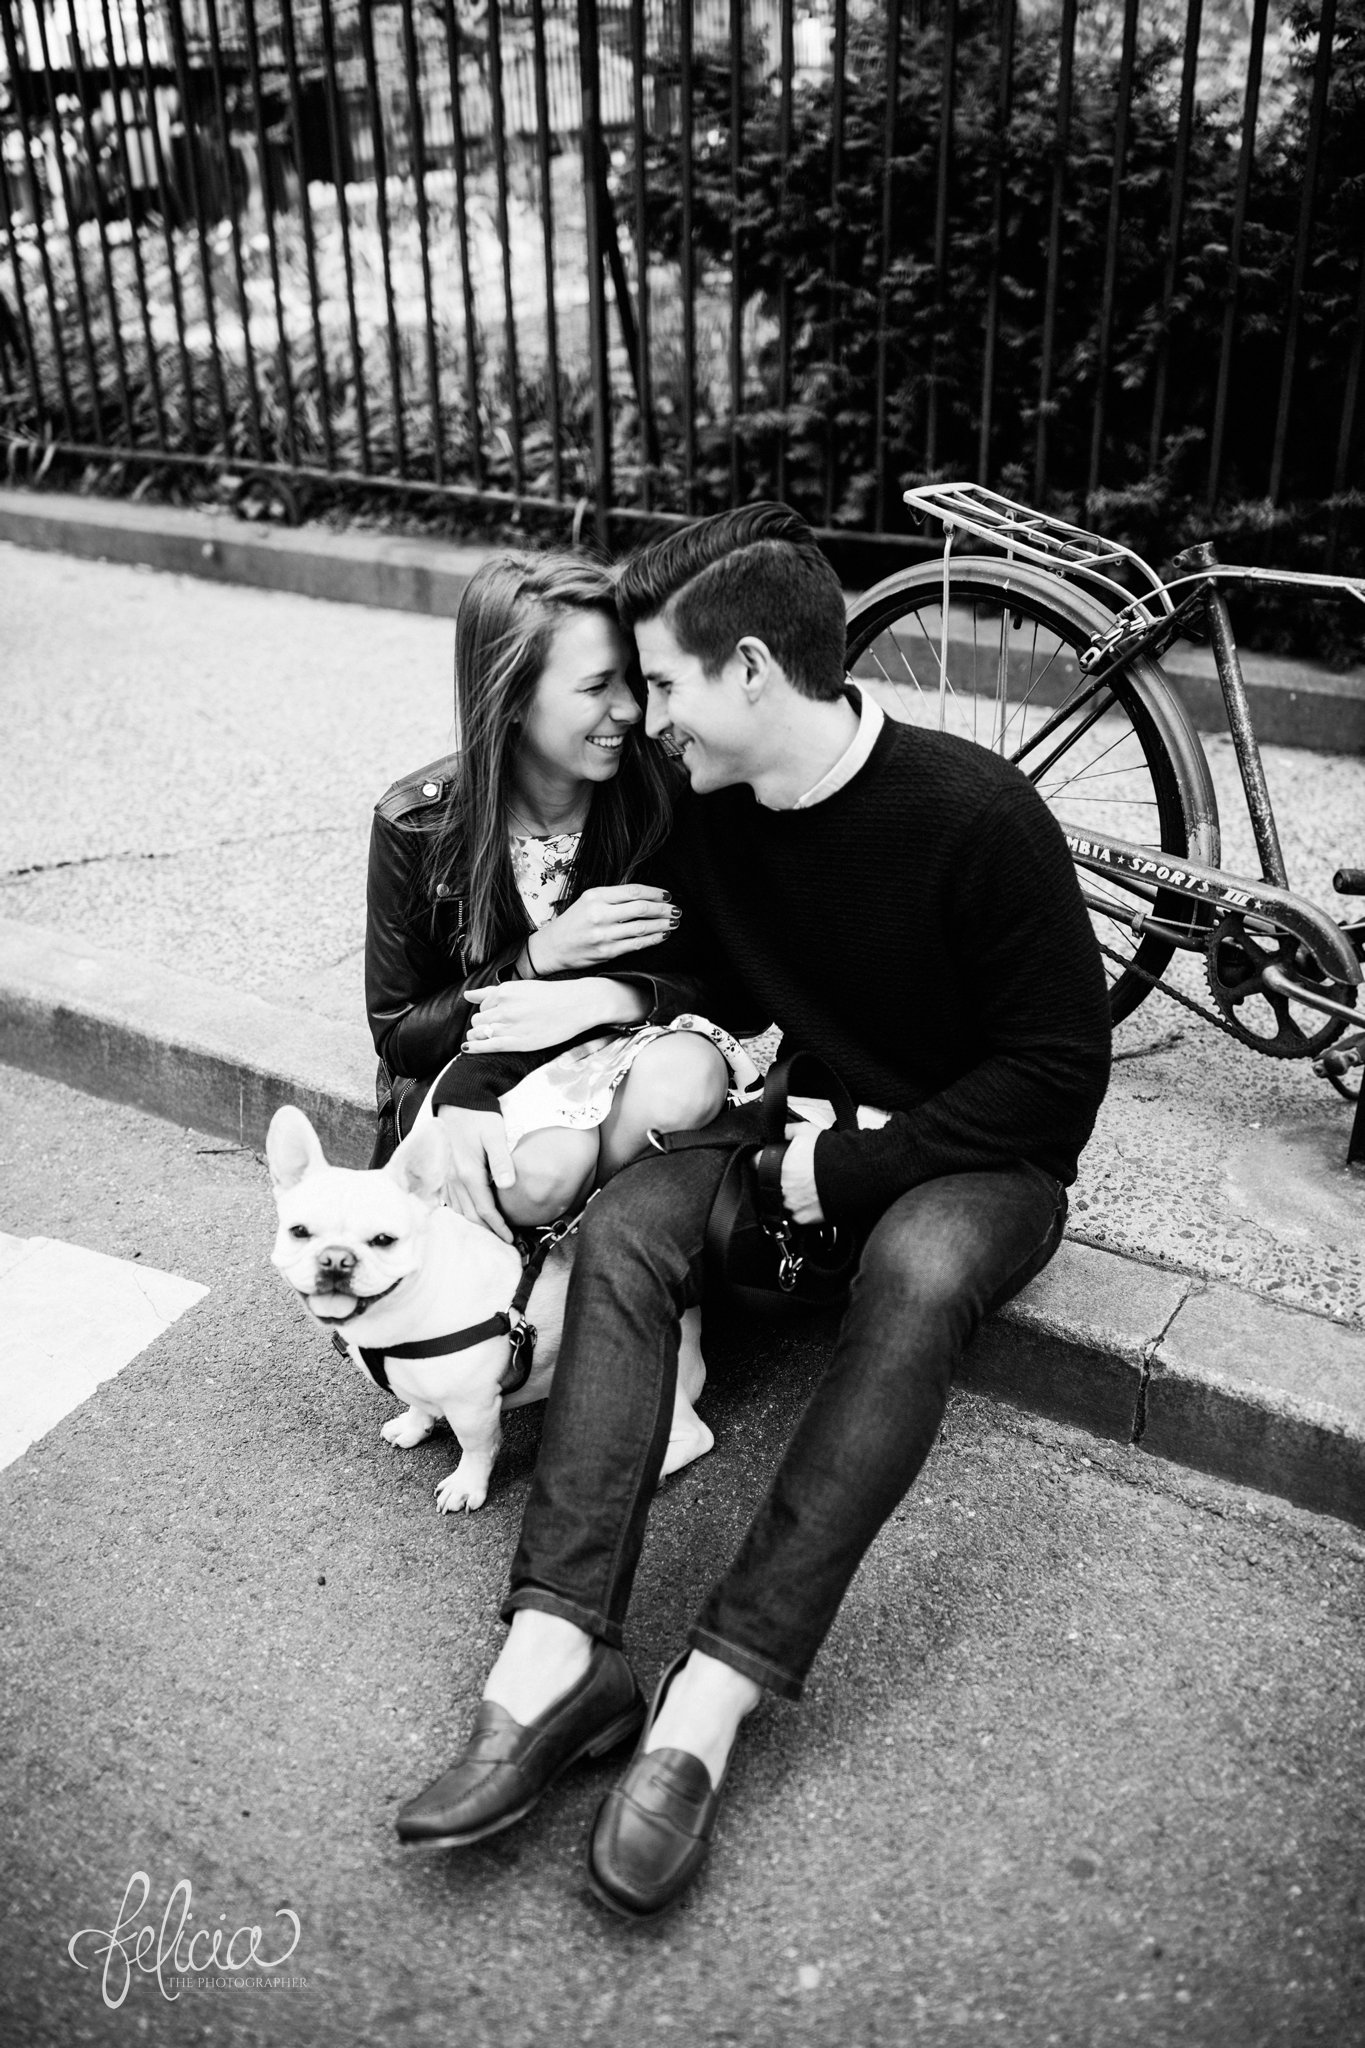 laughing bride and groom | candid | wedding | New York City | West Village | New York City photography | wedding photography | images by feliciathephotographer.com | French Bulldog | engagement photos | engagement pictures in park | engagement pictures with dog | black and white |